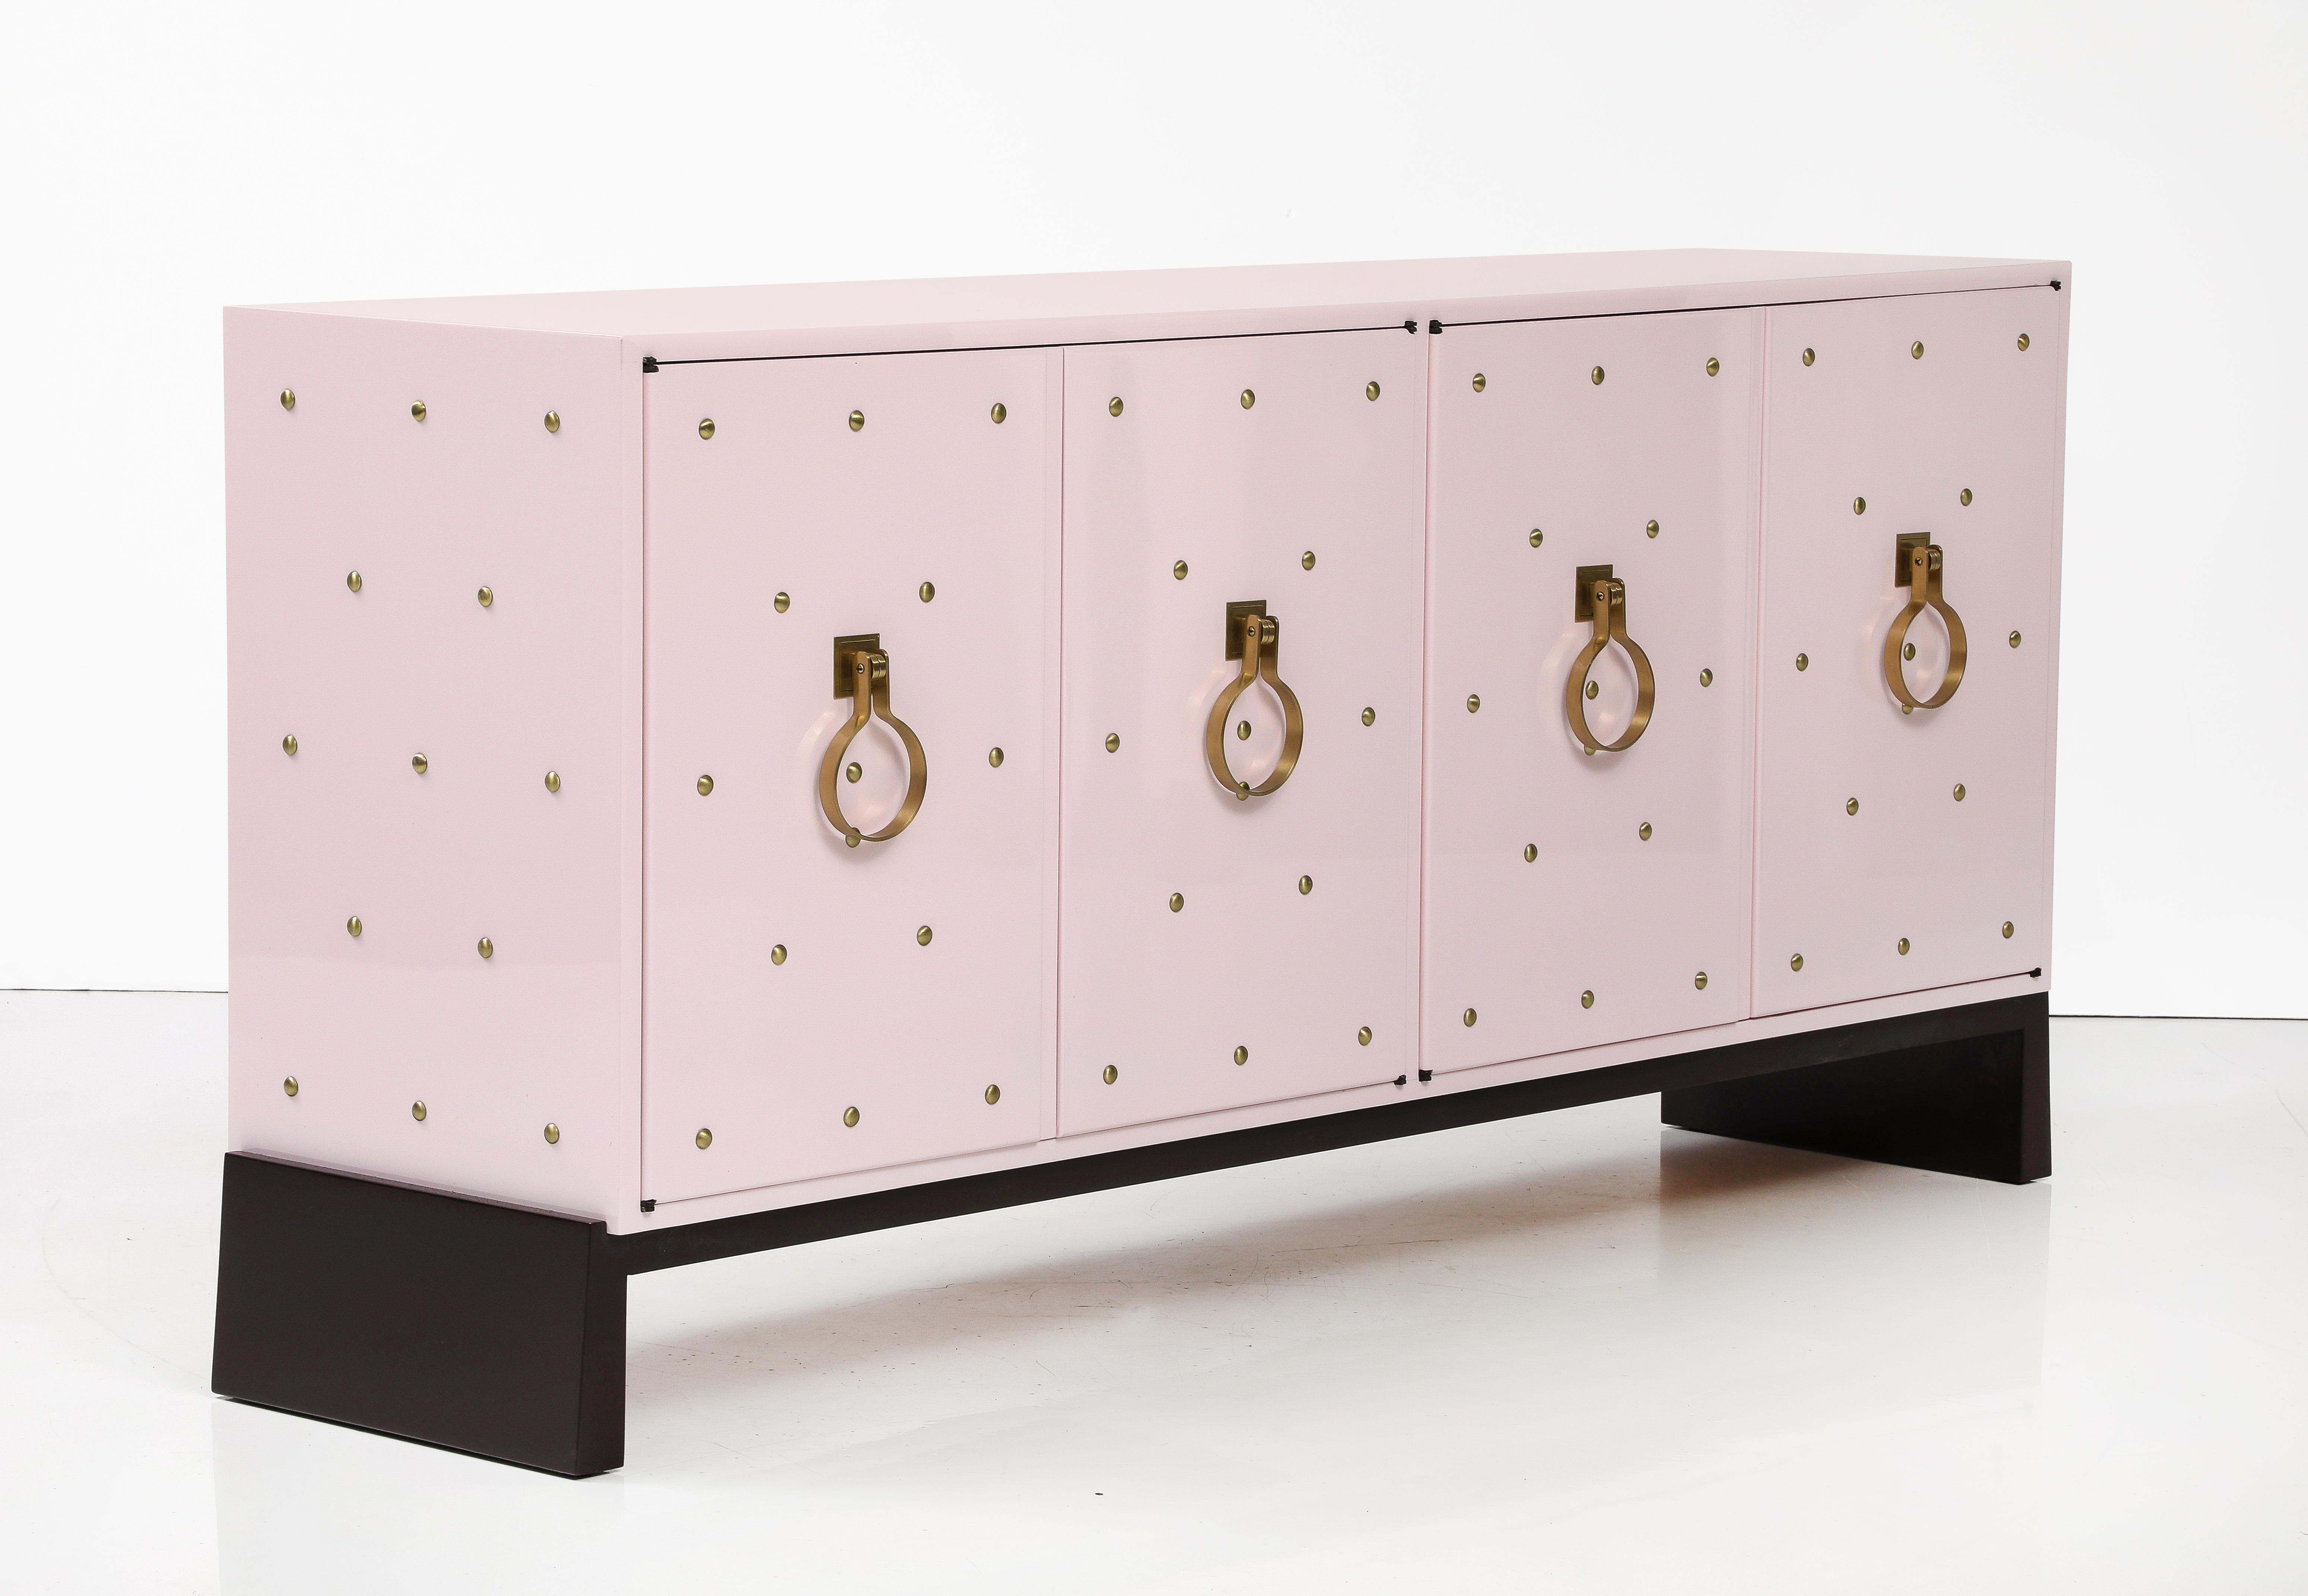 Exquisite custom Botticelli Shell Pink hand gloss lacquered credenza featuring brass studs and signature Parzinger brass door knocker pull rings. The cabinet has adjustable shelves in each compartment and a divided felt lined drawer with the